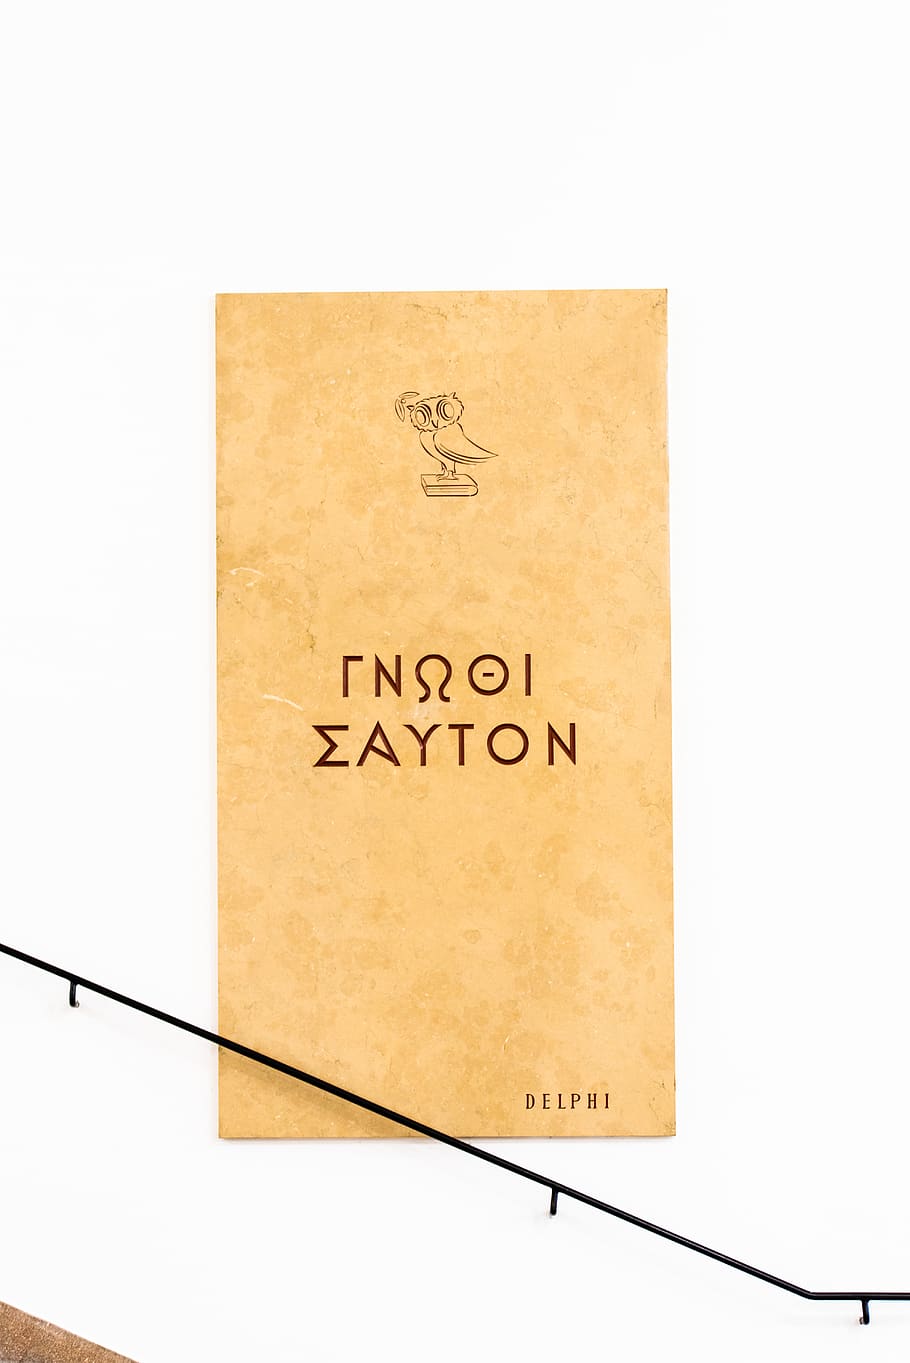 text, page, book, novel, gnothi seauton, board, wisdom, γνῶθι σαυτόν